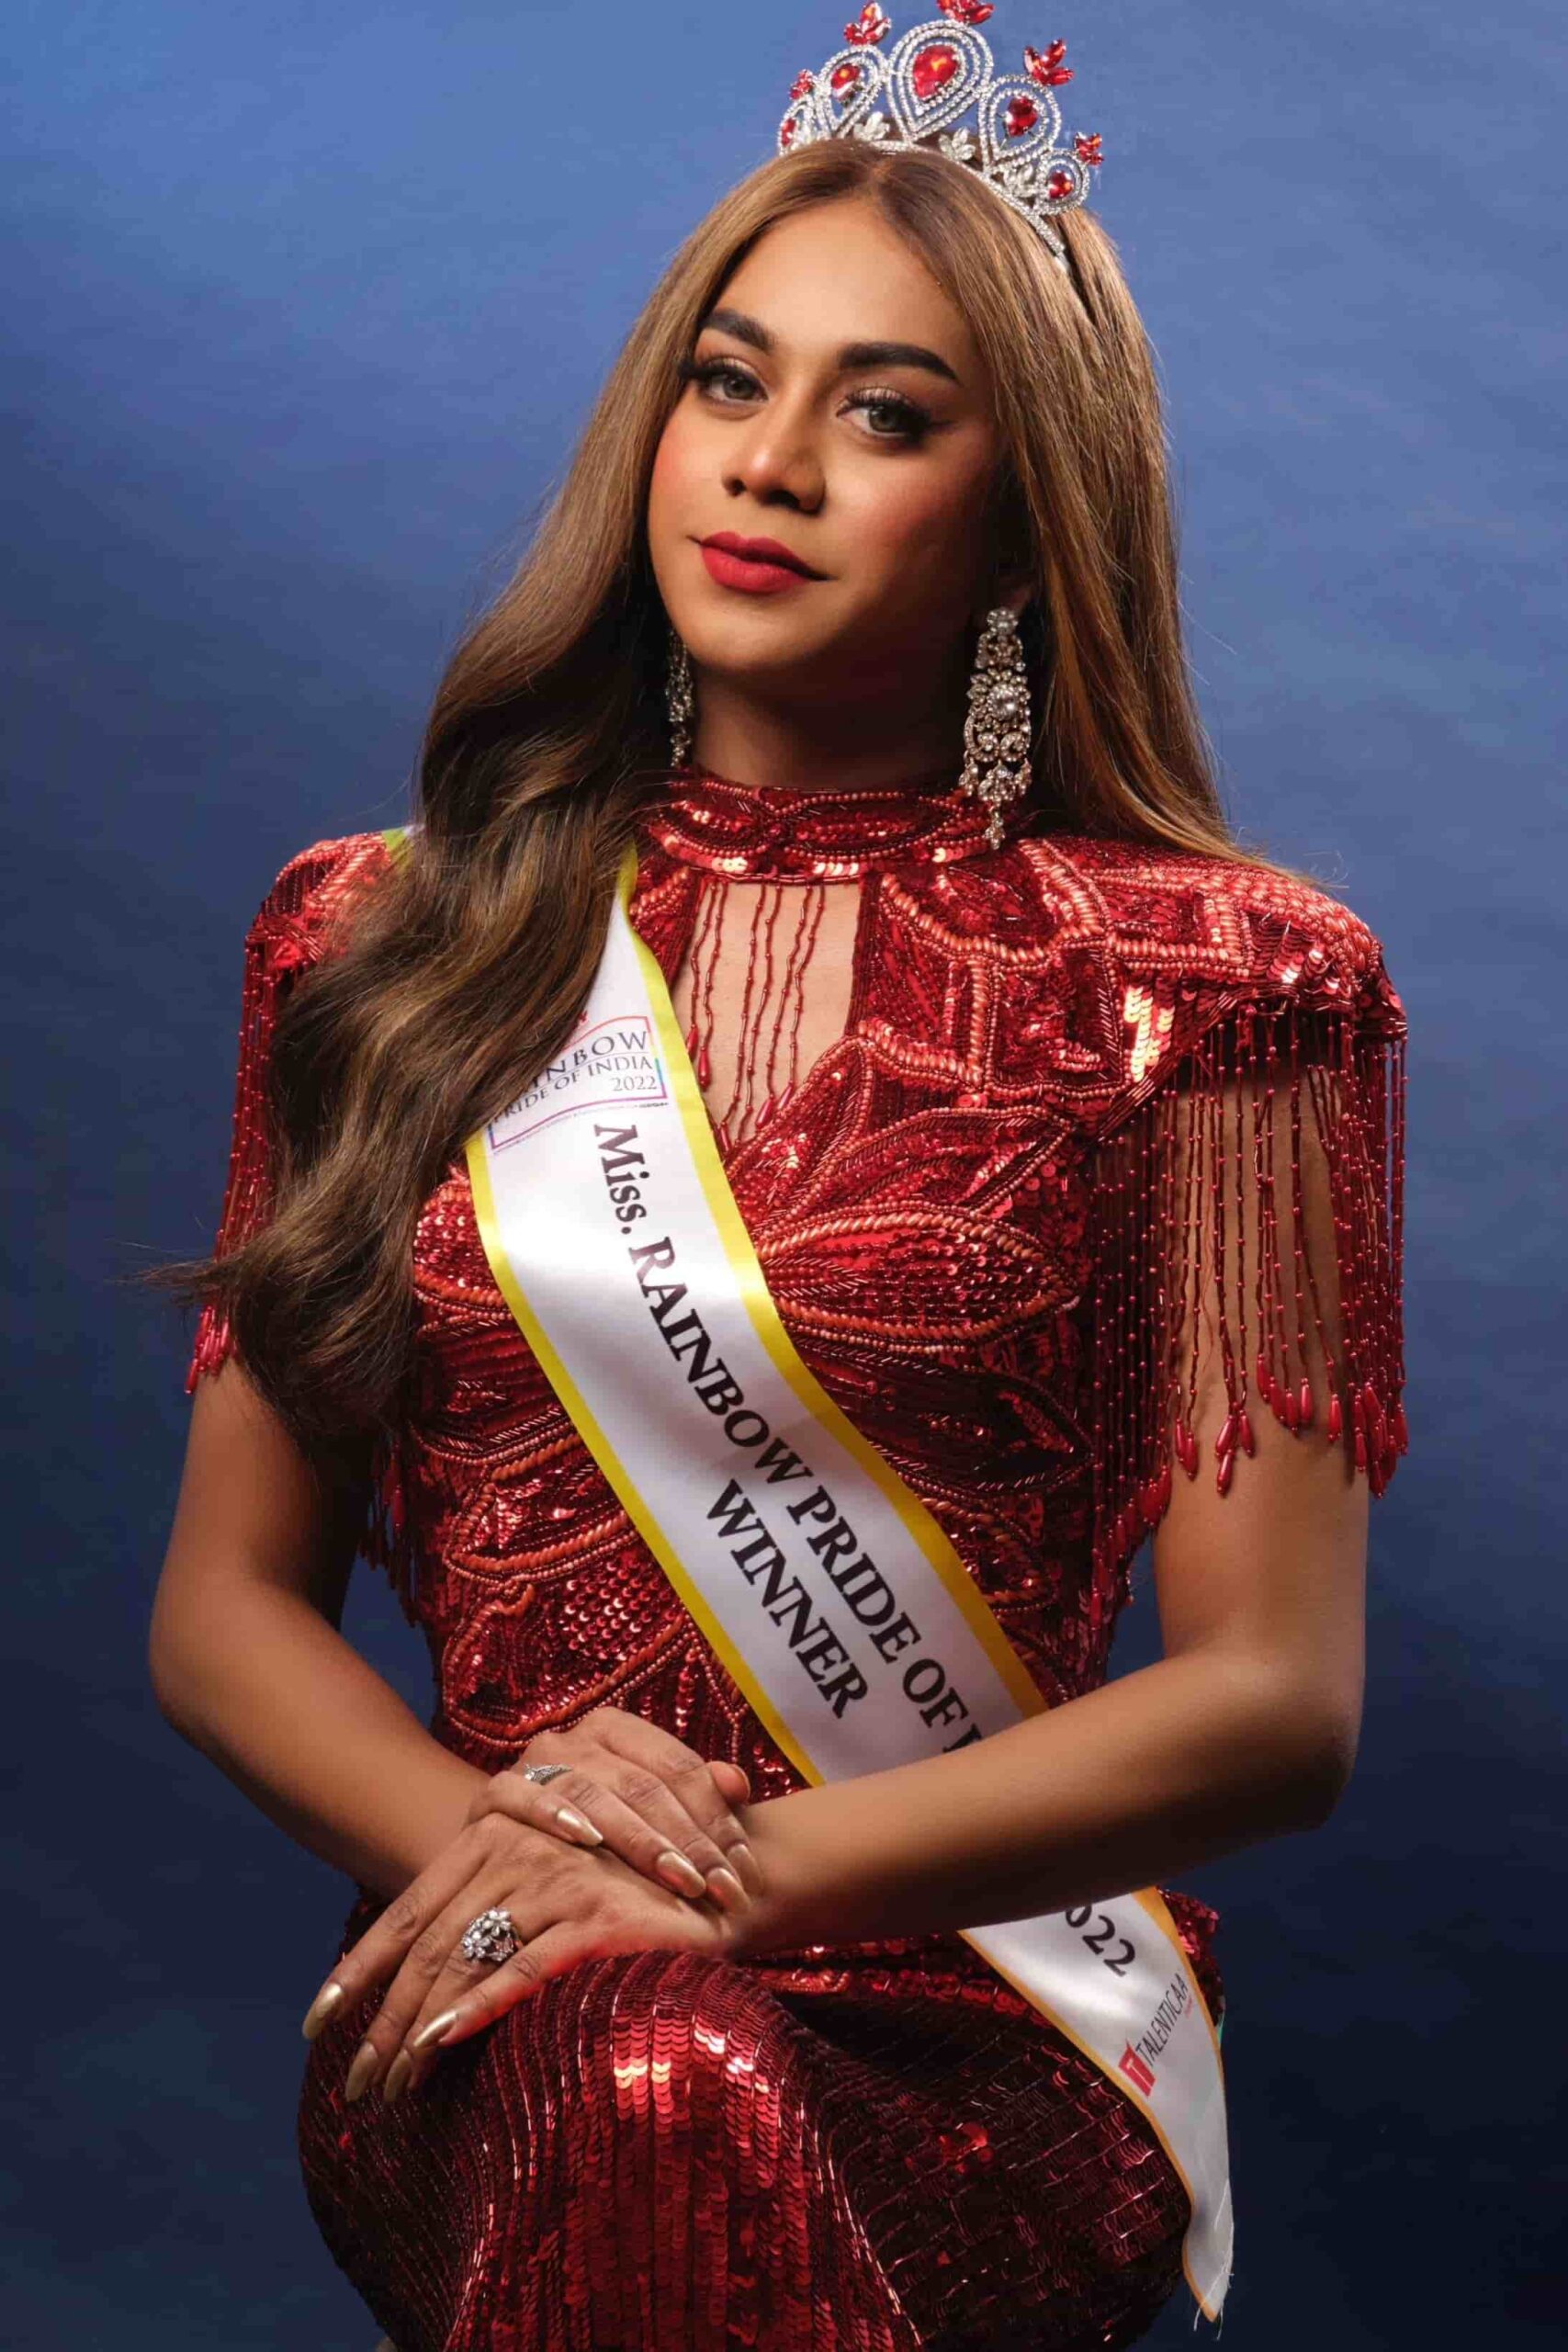 bengaluru drag artist beyonce after winning the ms rainbow pride of india 2022 title